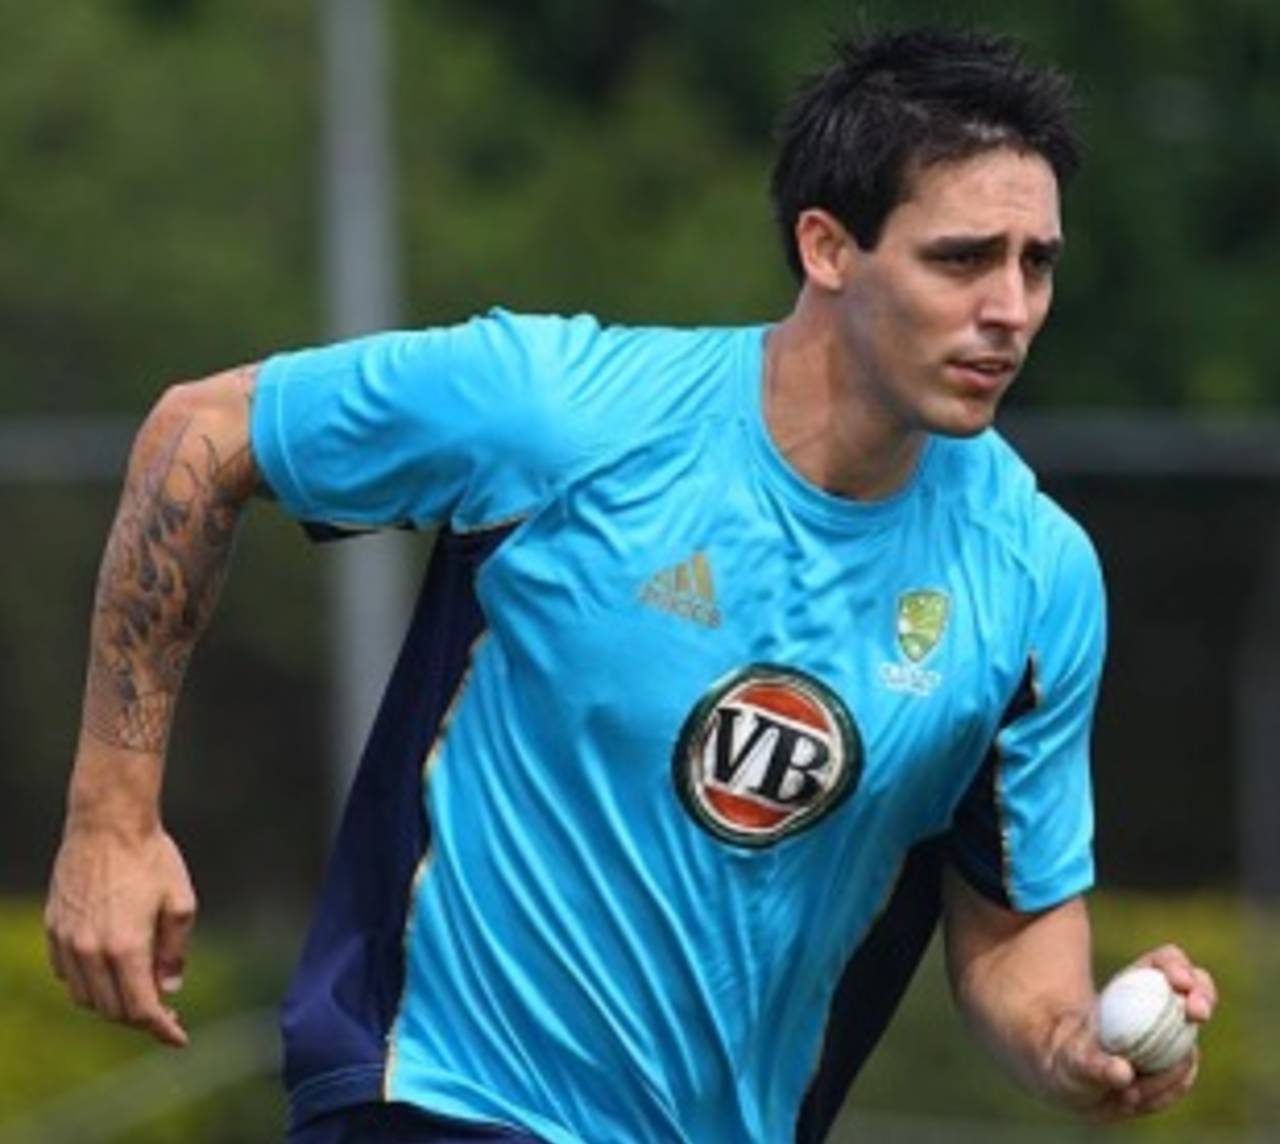 Mitchell Johnson had a tattoo on his right arm during the off-season and now has an infection in the elbow, although it is unclear whether the two are related&nbsp;&nbsp;&bull;&nbsp;&nbsp;Getty Images